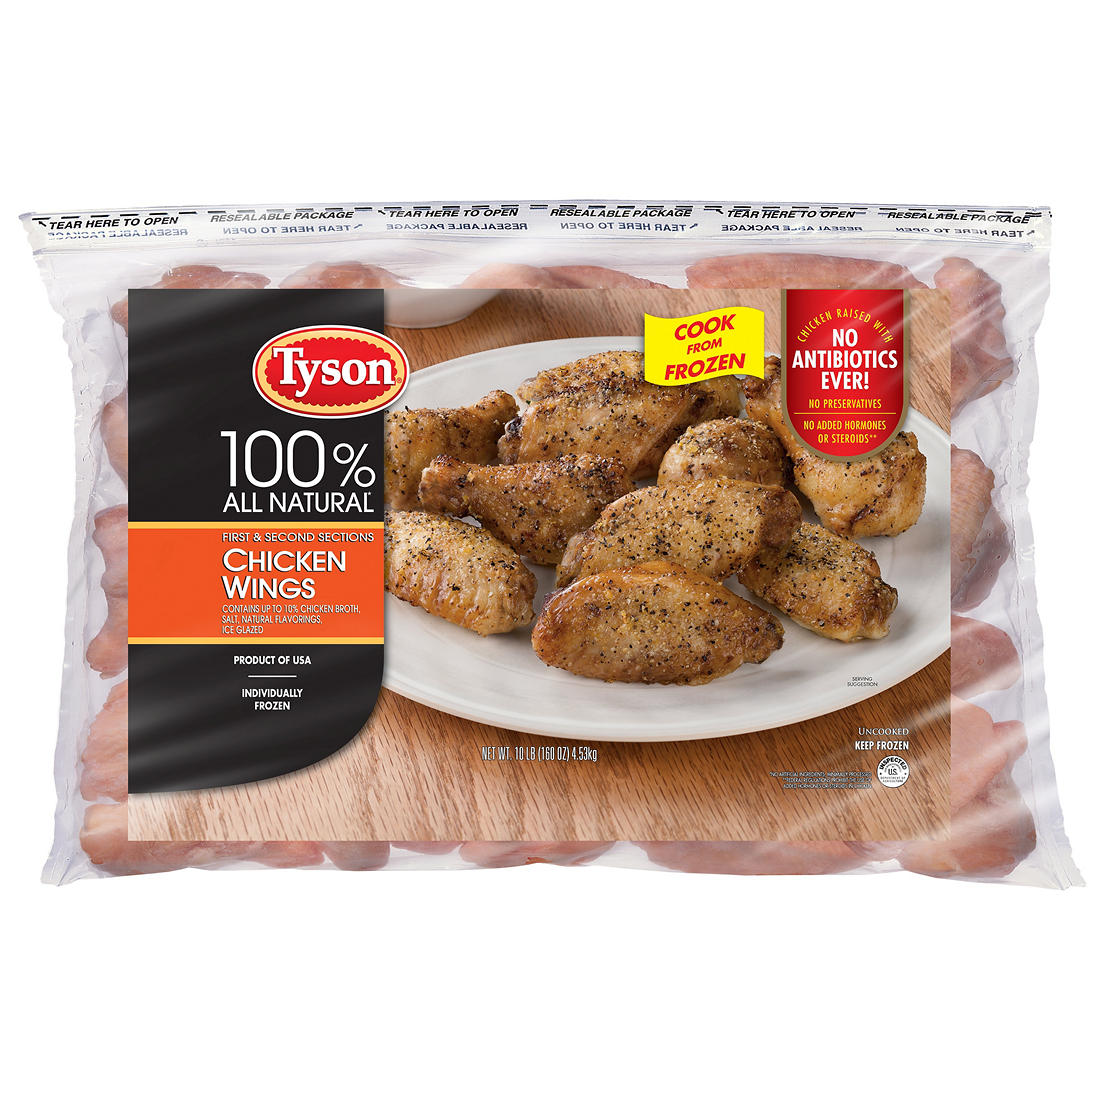 Tyson Frozen Chicken Wing Sections, 10 lbs.